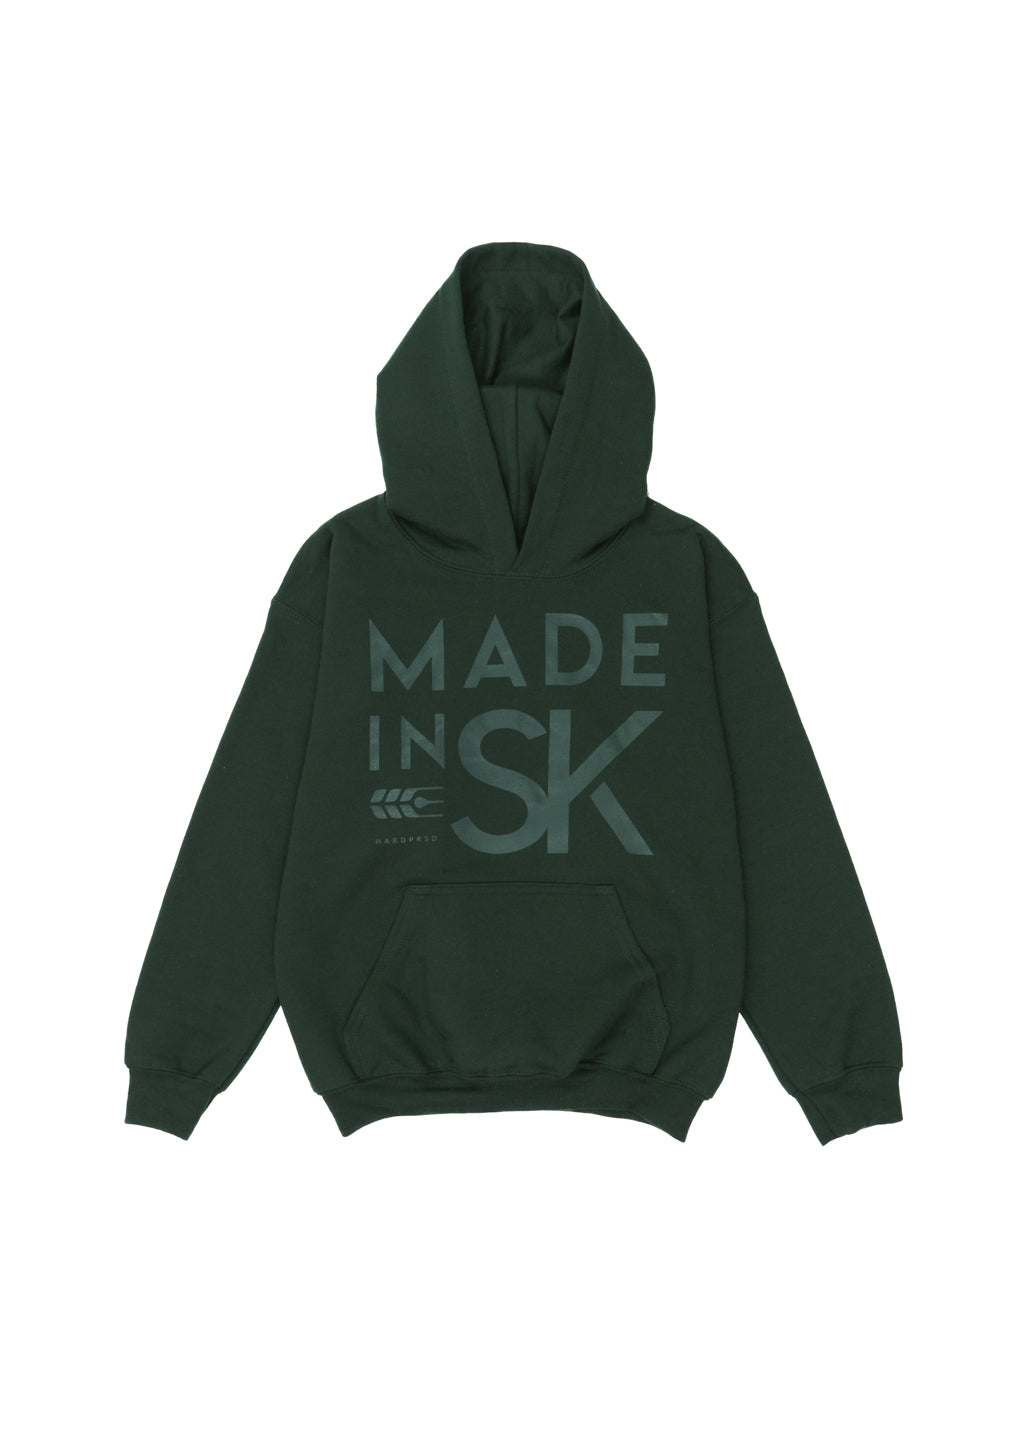 Made in SK Sweater | Boreal | Kids